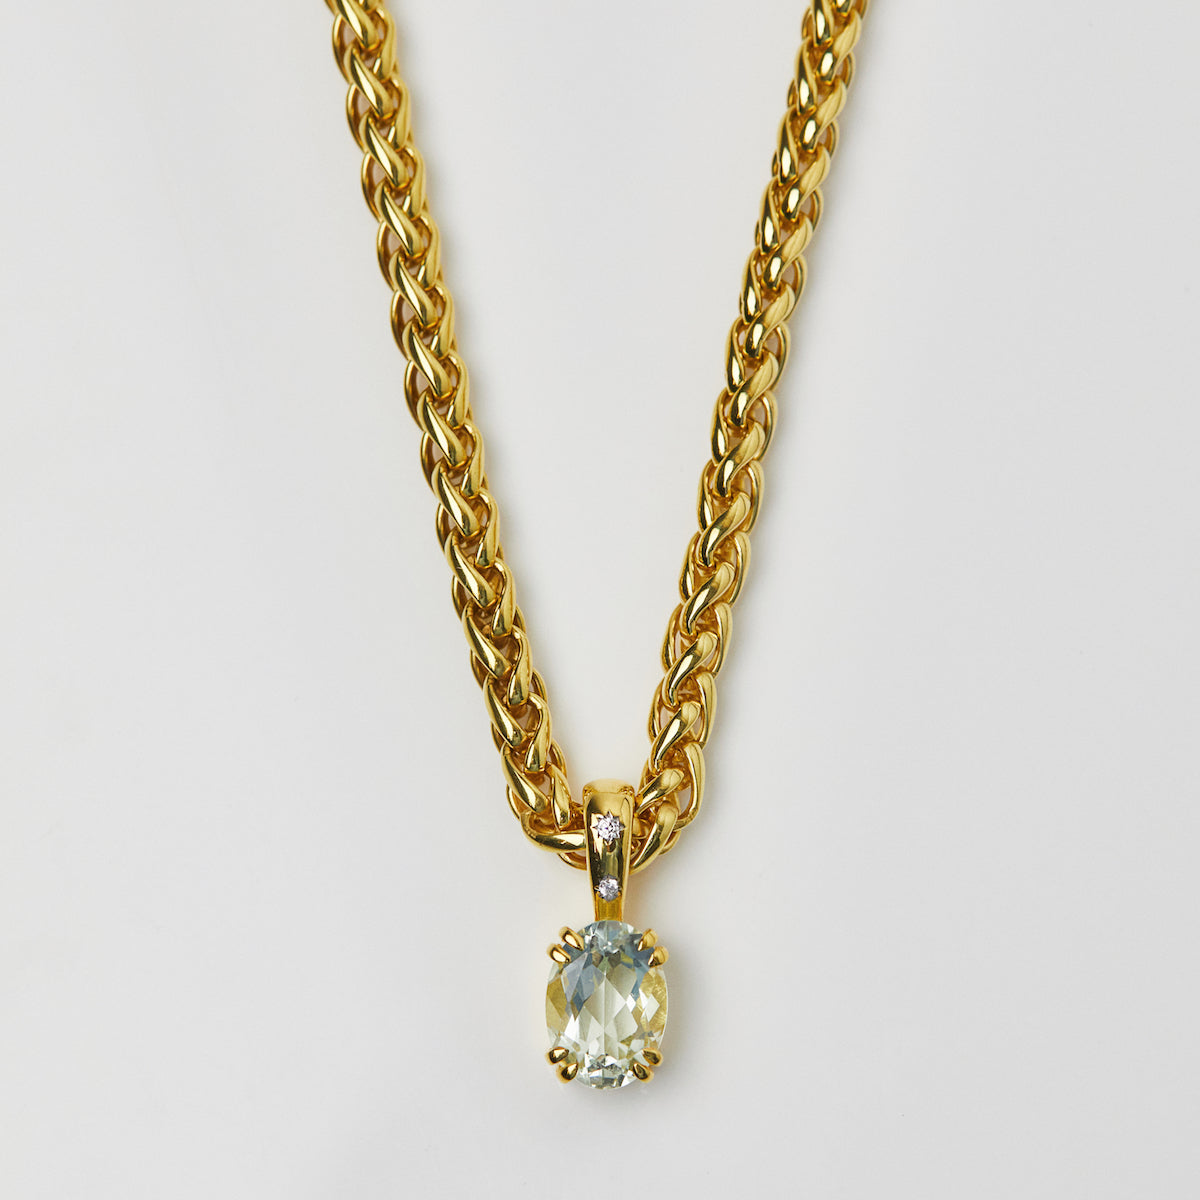 Carrie elizabeth spiga chain with green amethyst pendant necklace in gold